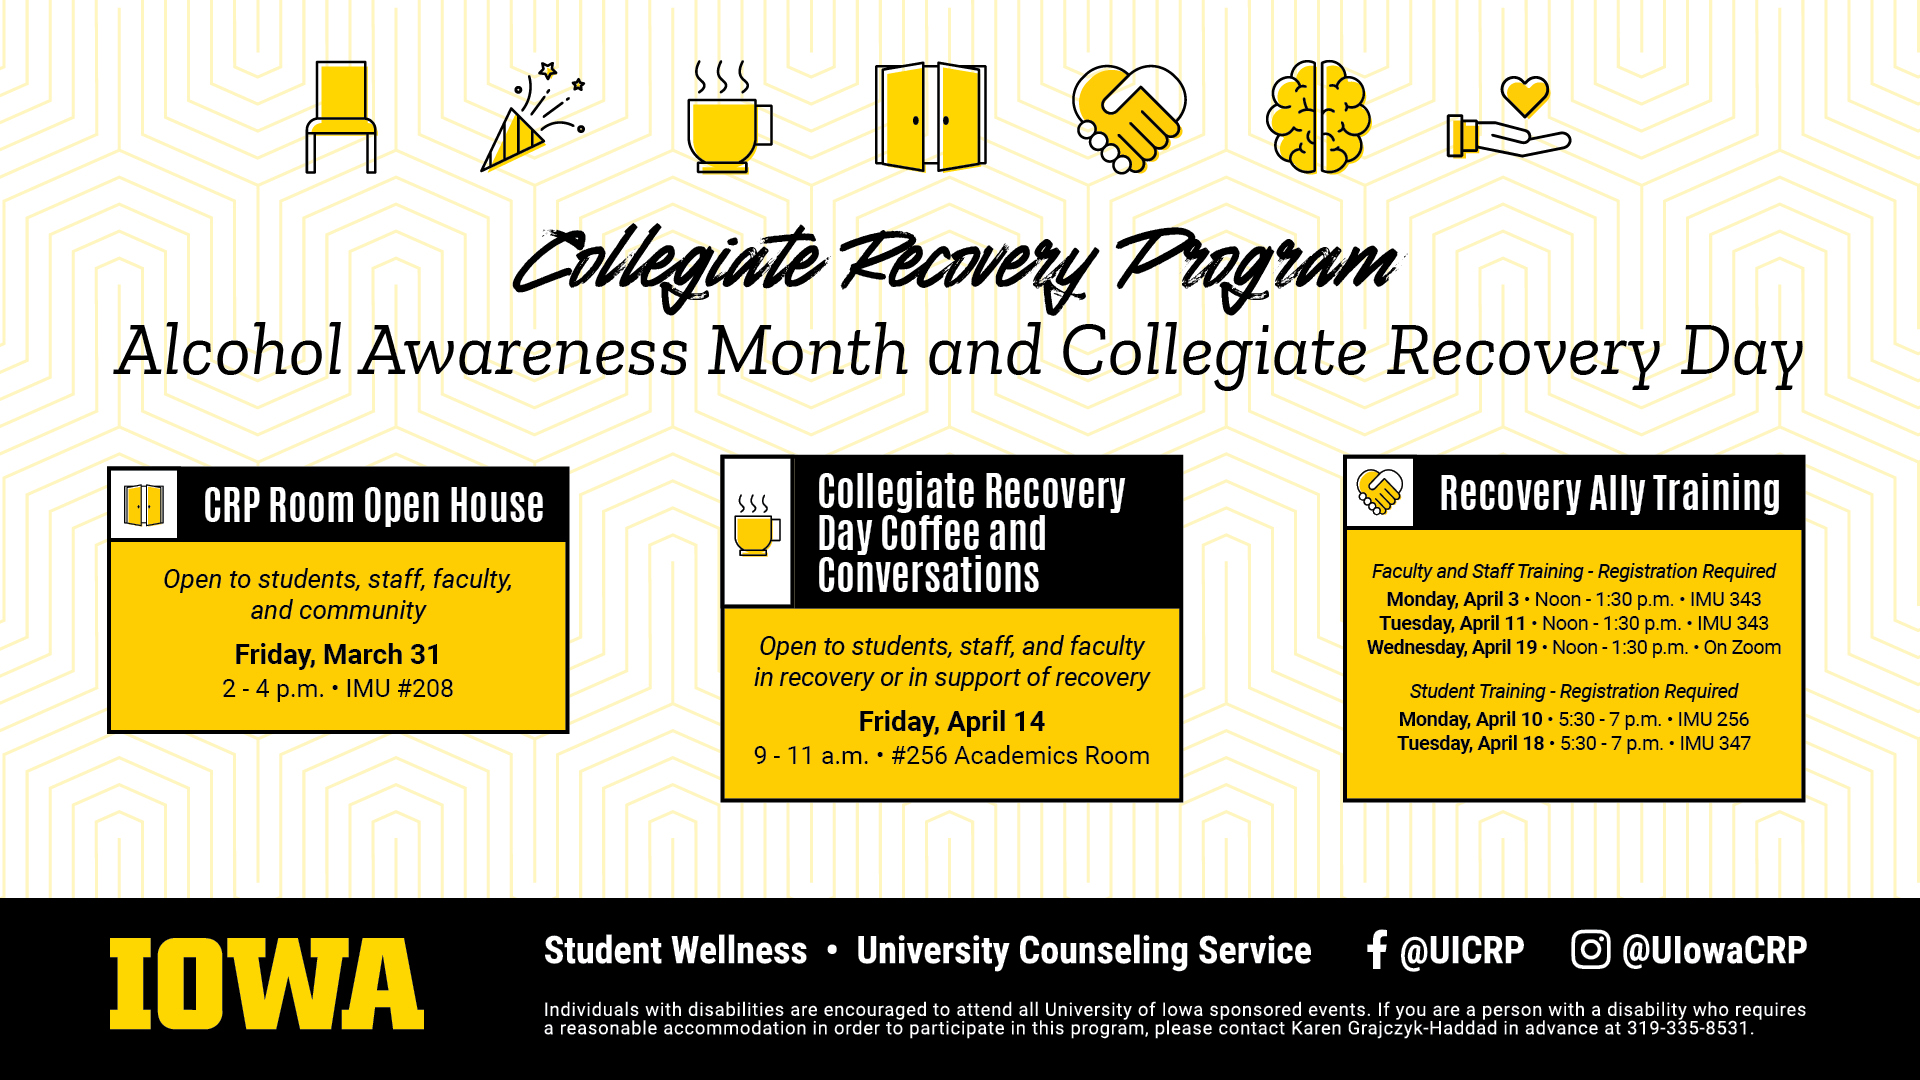 Collegiate Recovery Program Alcohol Awareness Month and Collegiate Recovery Day